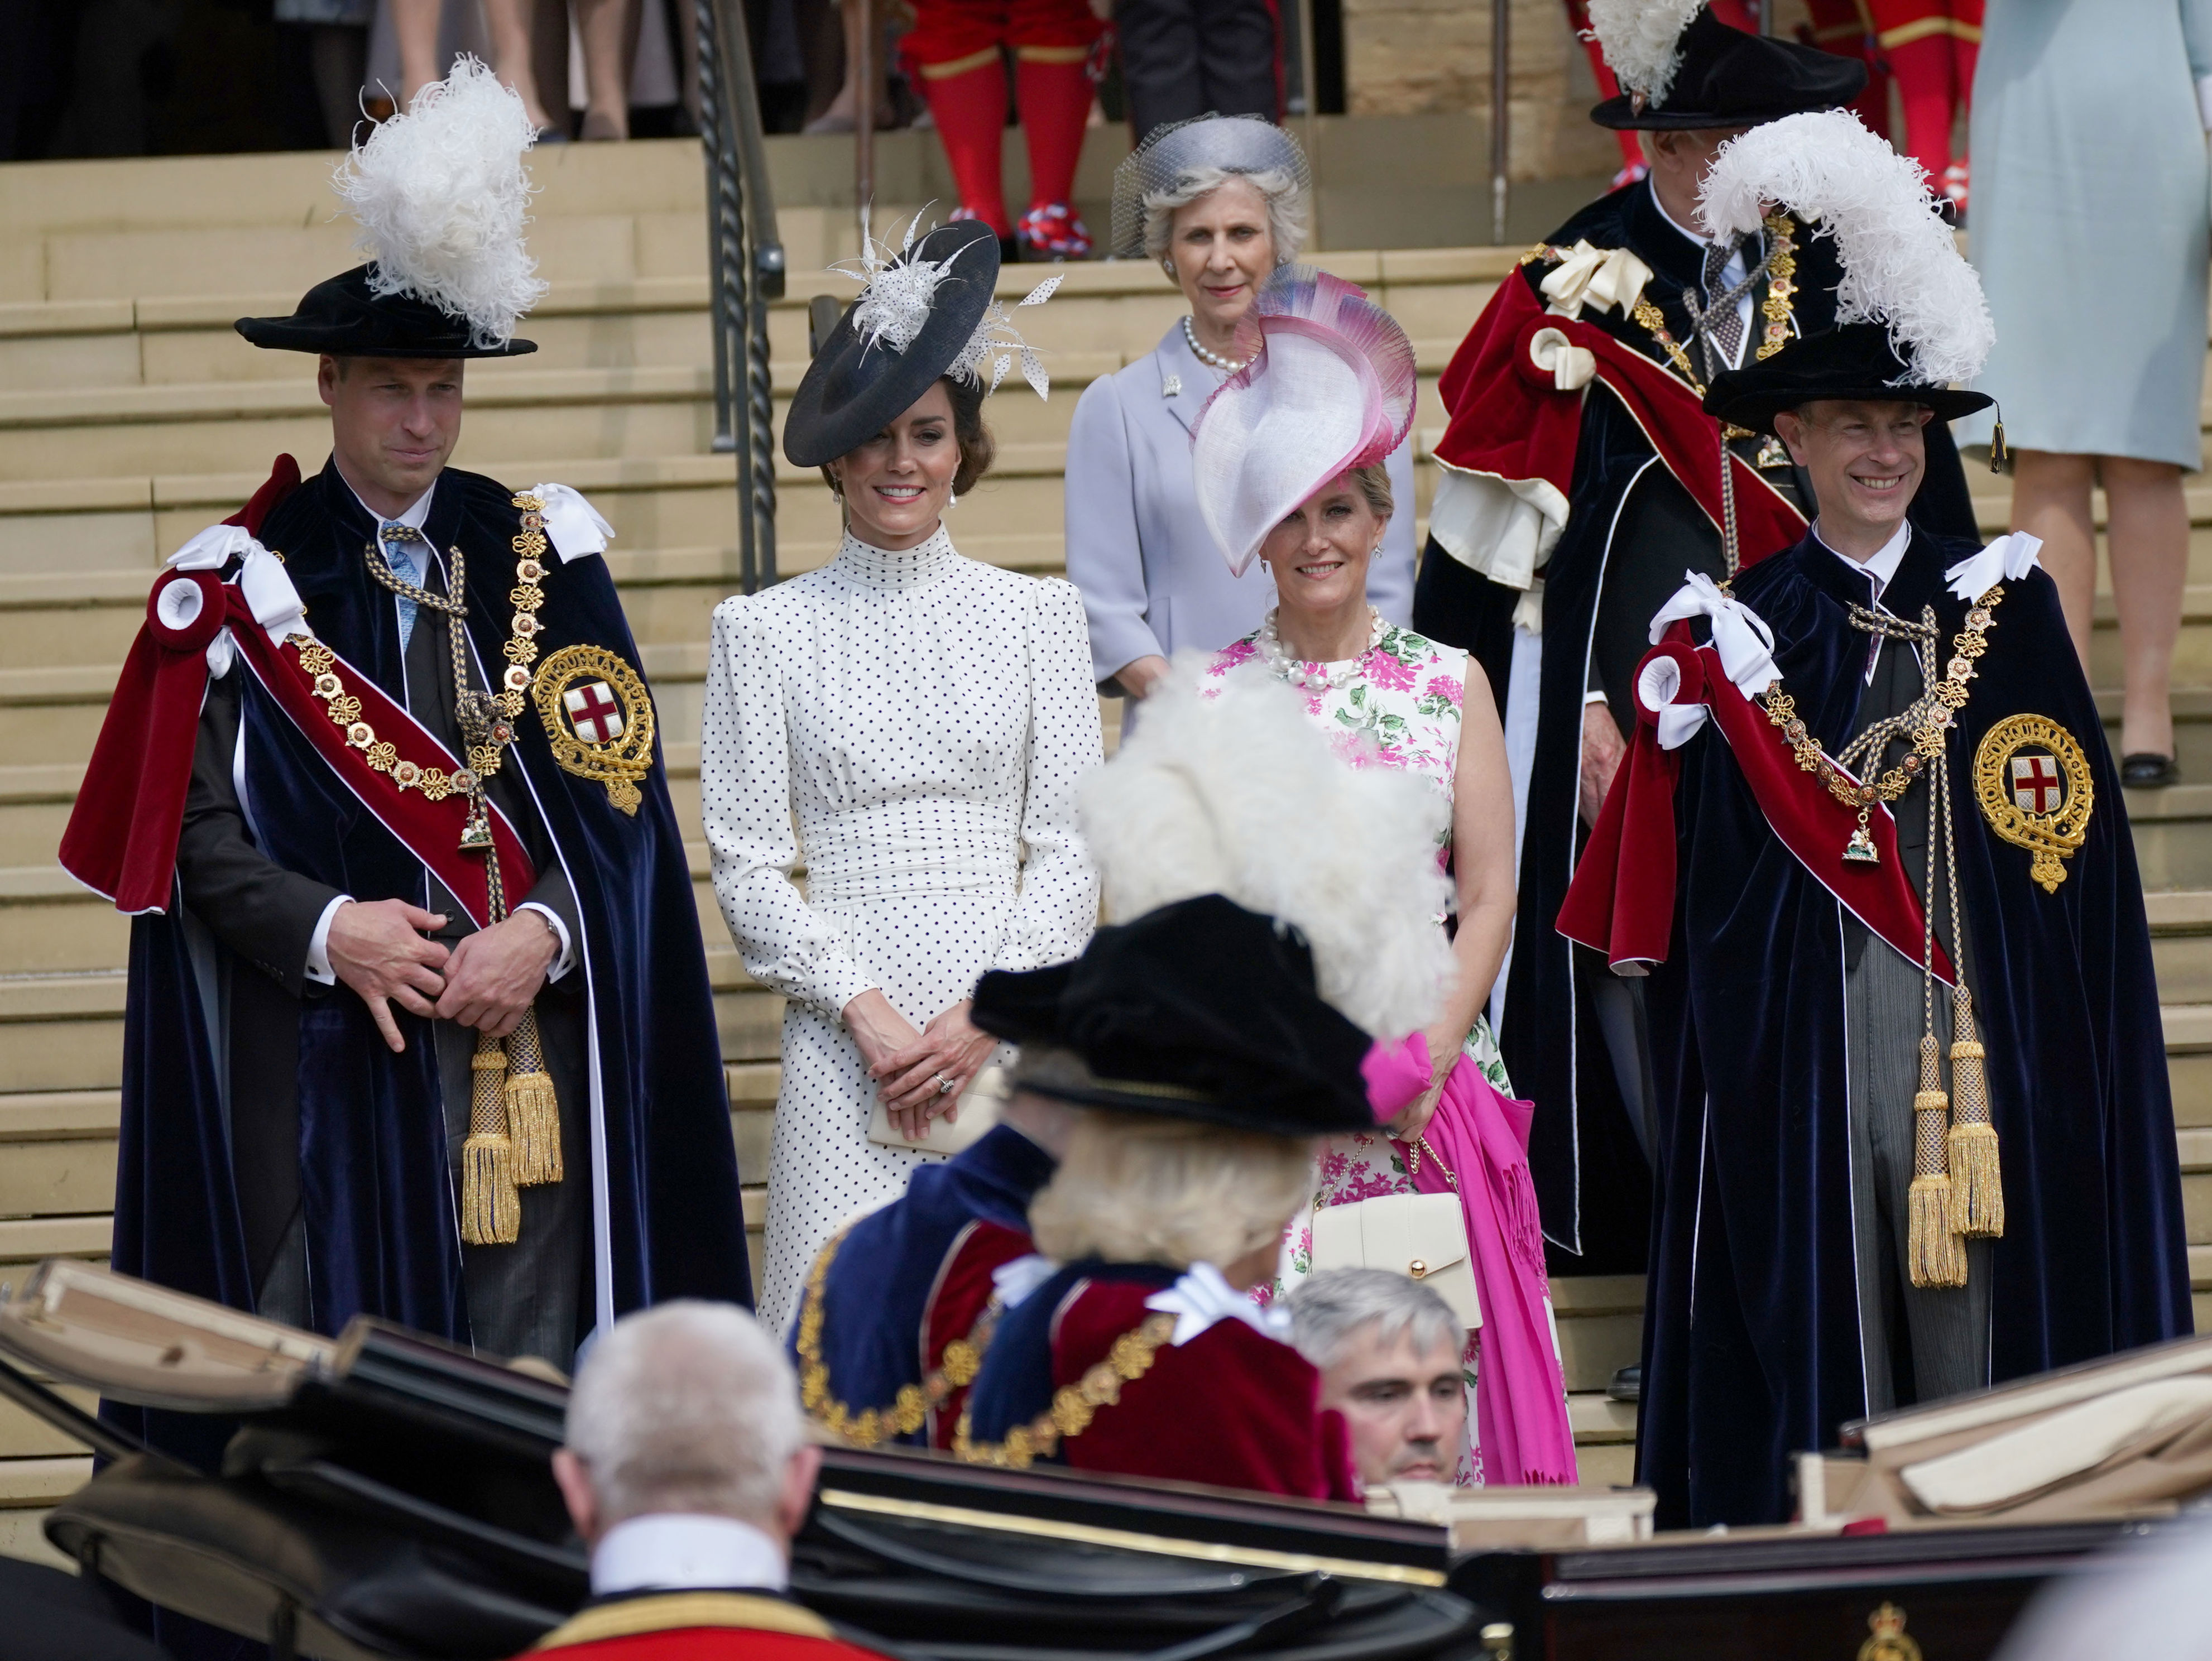 <p>Prince William and wife Princess Kate and Sophie, Duchess of Edinburgh and husband Prince Edward watched as King Charles III and Queen Camilla departed after the Order of the Garter Service at Windsor Castle in Windsor, England, on June 19, 2023. The Order of the Garter is the oldest and most senior order of chivalry in Britain. Knights of the Garter are chosen personally by the sovereign to honor those who have held public office, contributed in a particular way to national life or who have served the sovereign personally.</p>